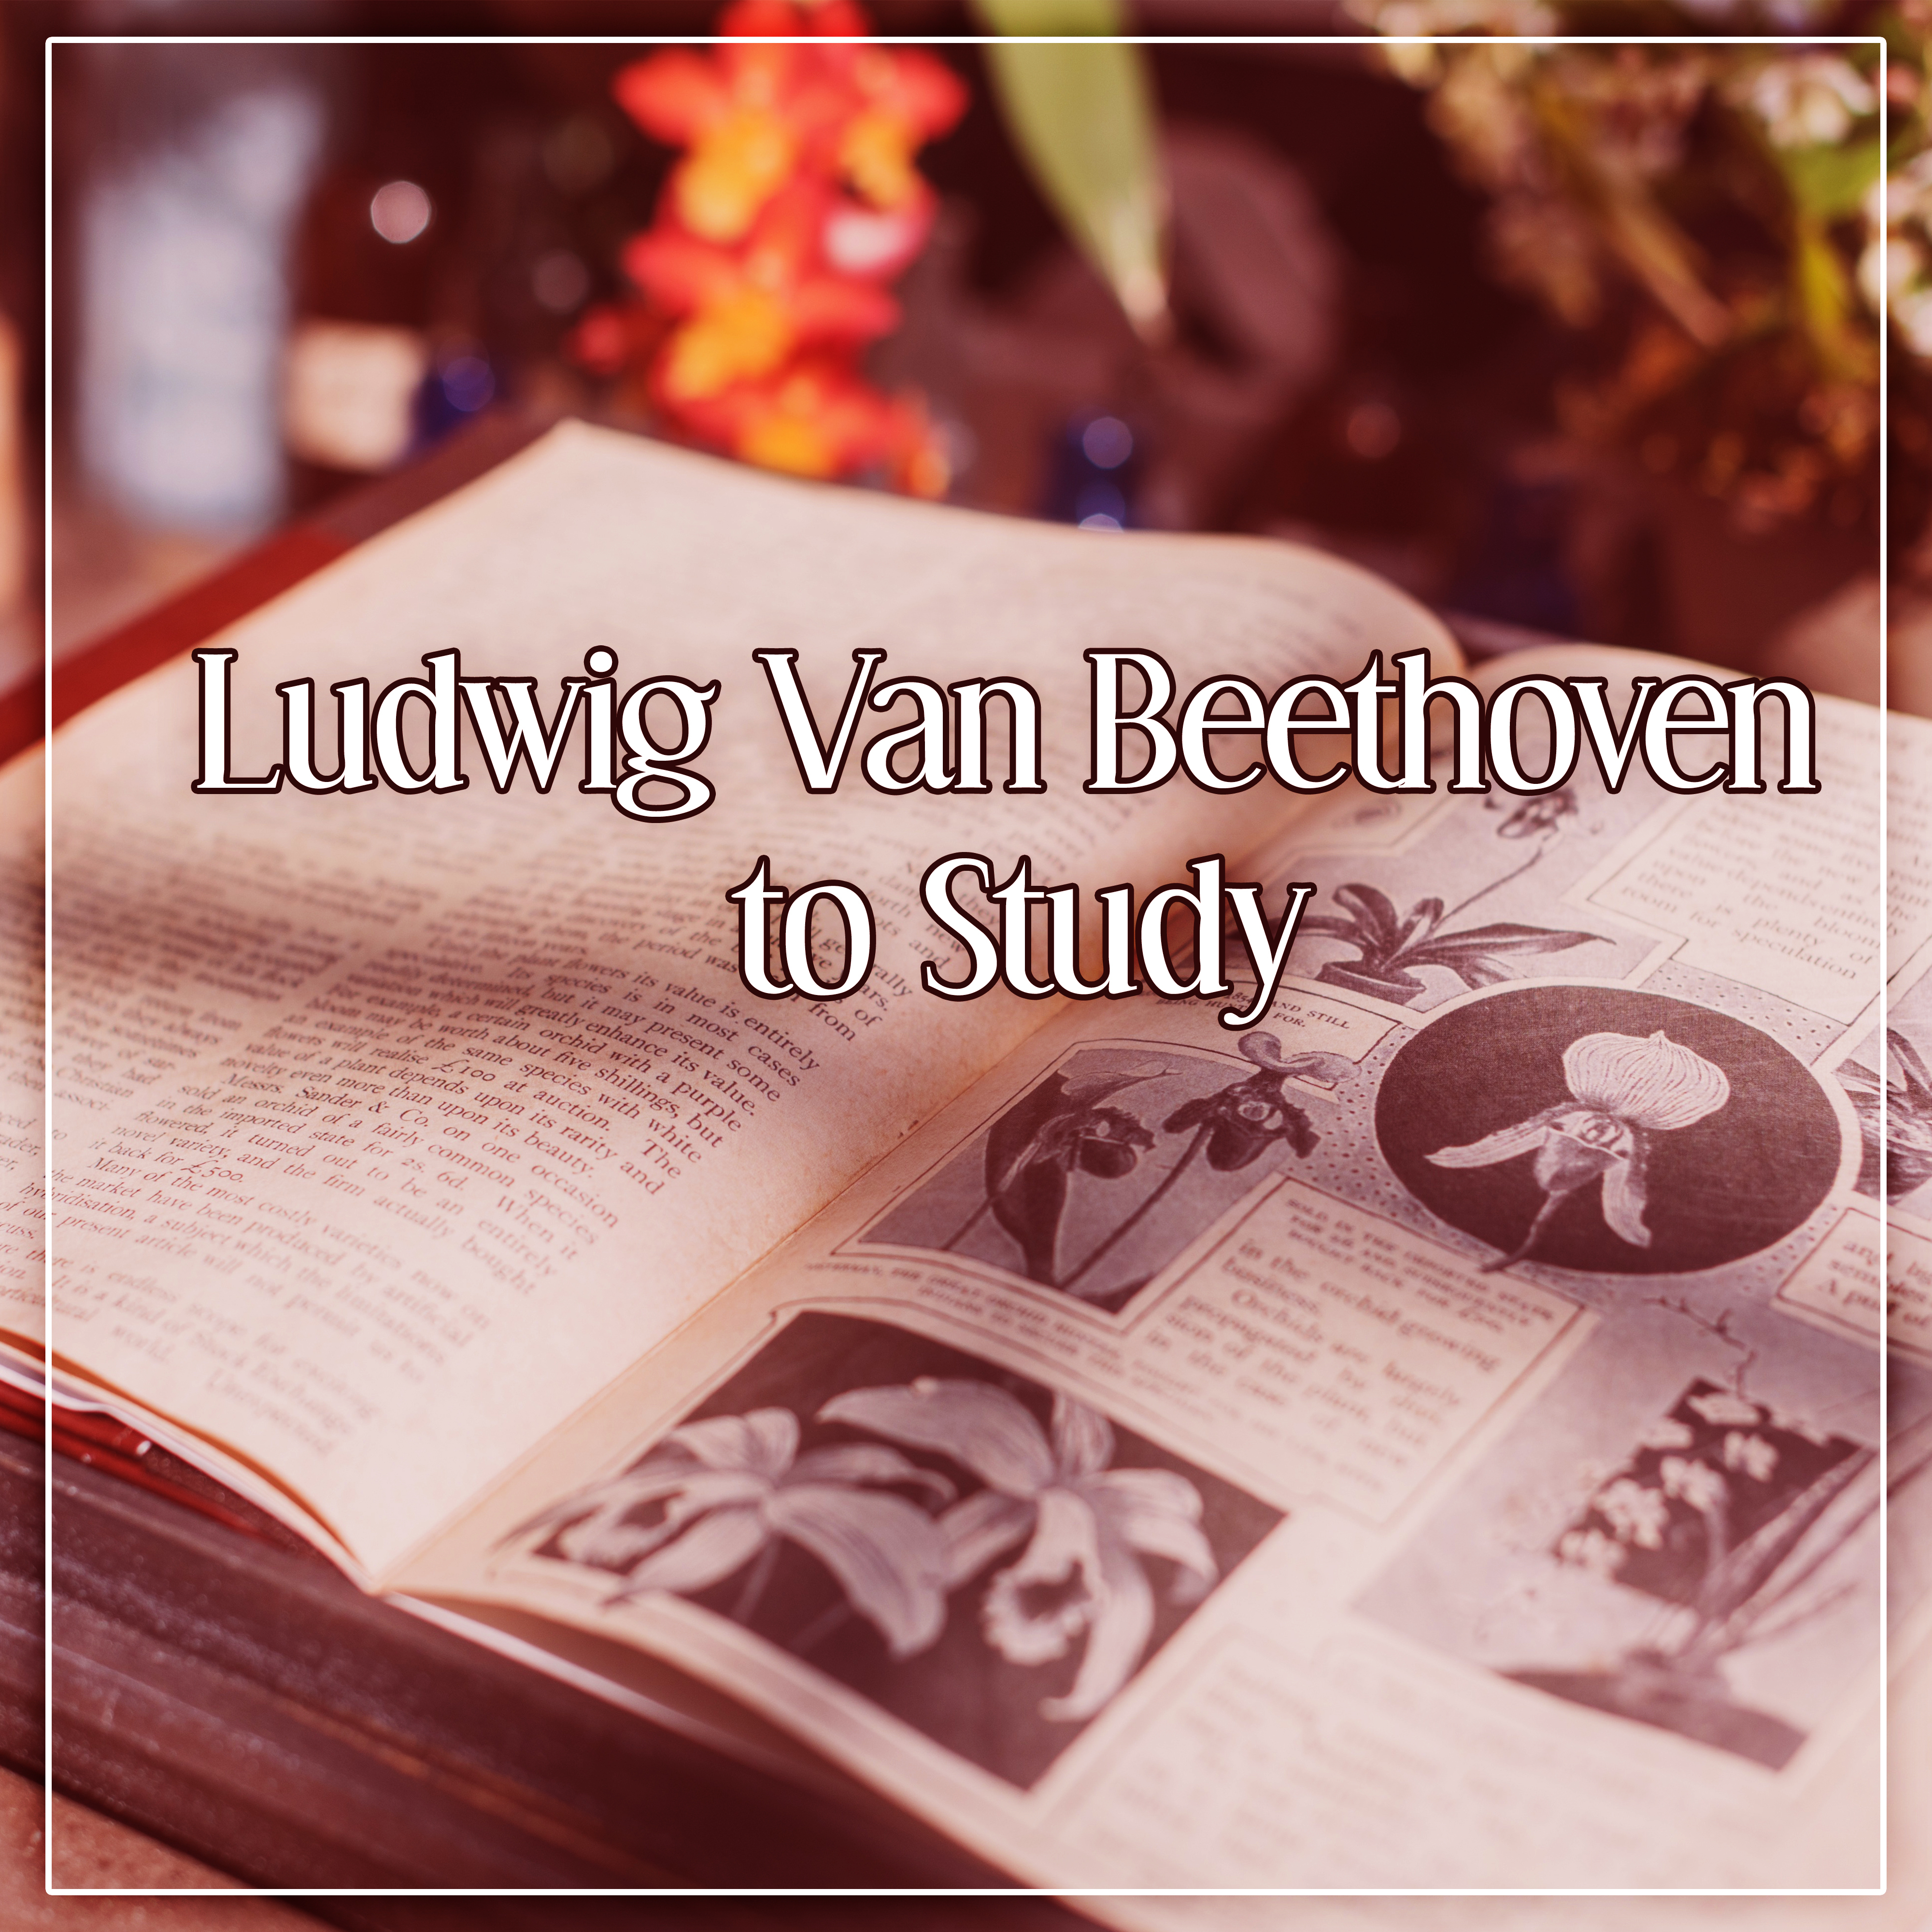 Ludwig Van Beethoven to Study  Train Your Brain, Classical Music to Study, Beethoven Songs, Clear Mind